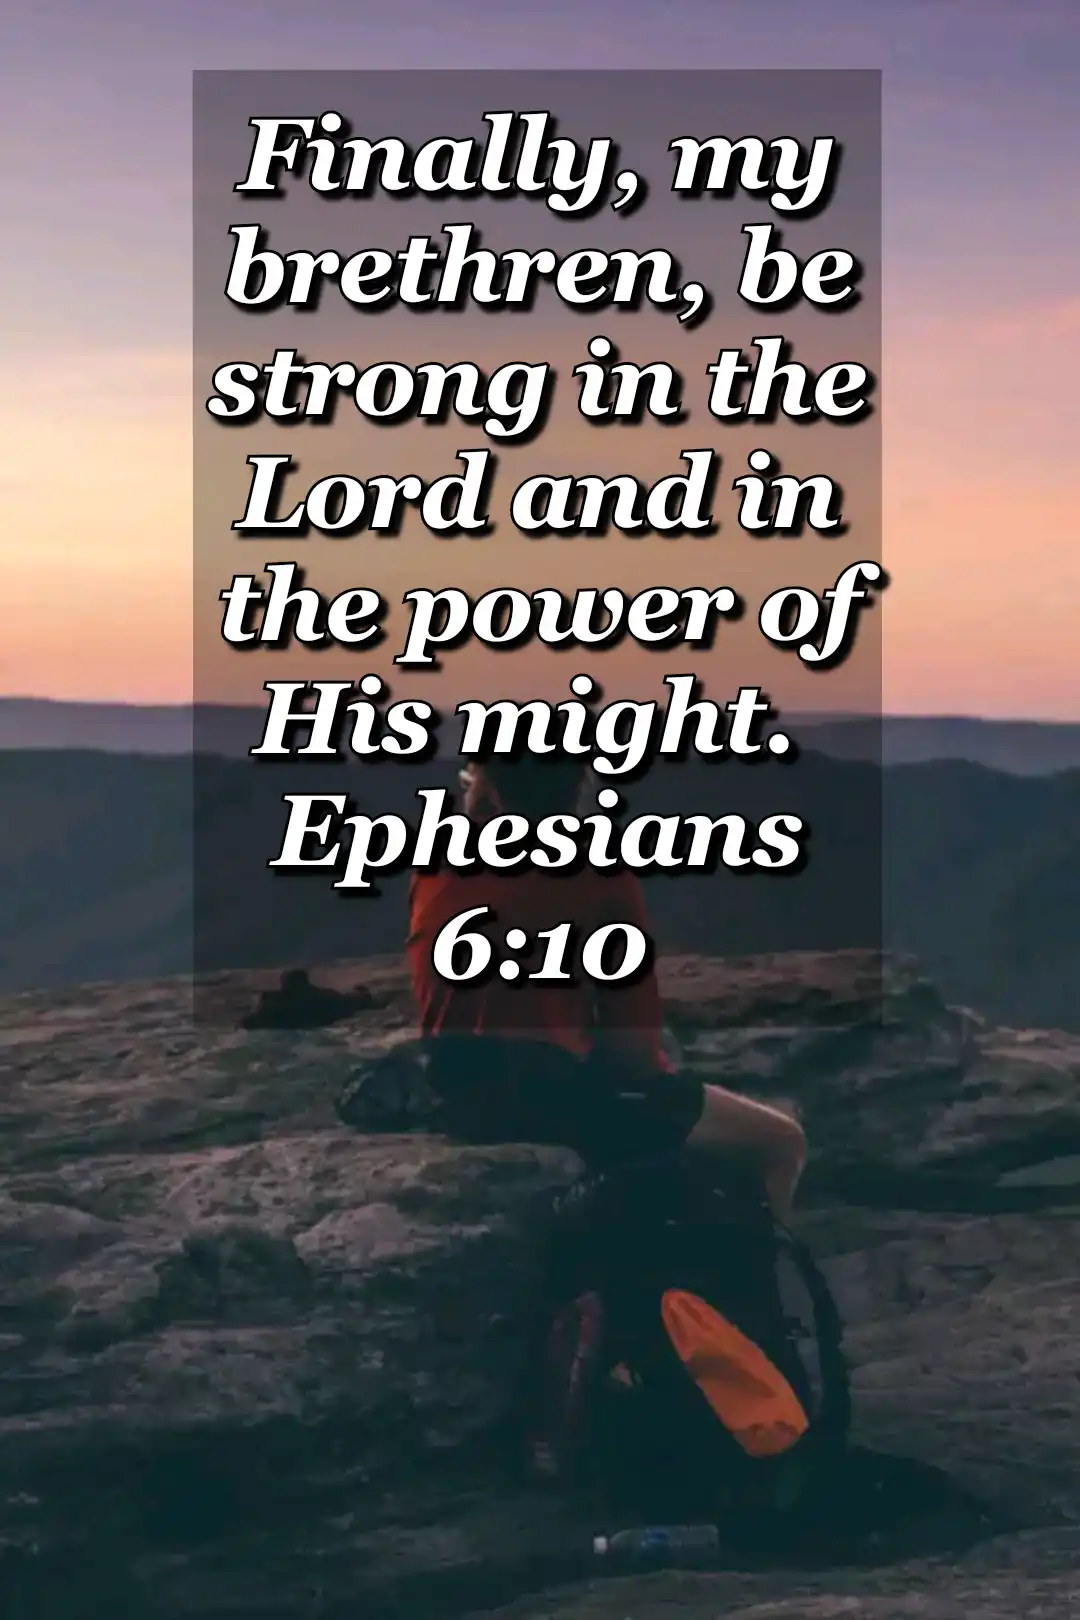 Bible-Verses-About Weakness (Ephesians 6:10)